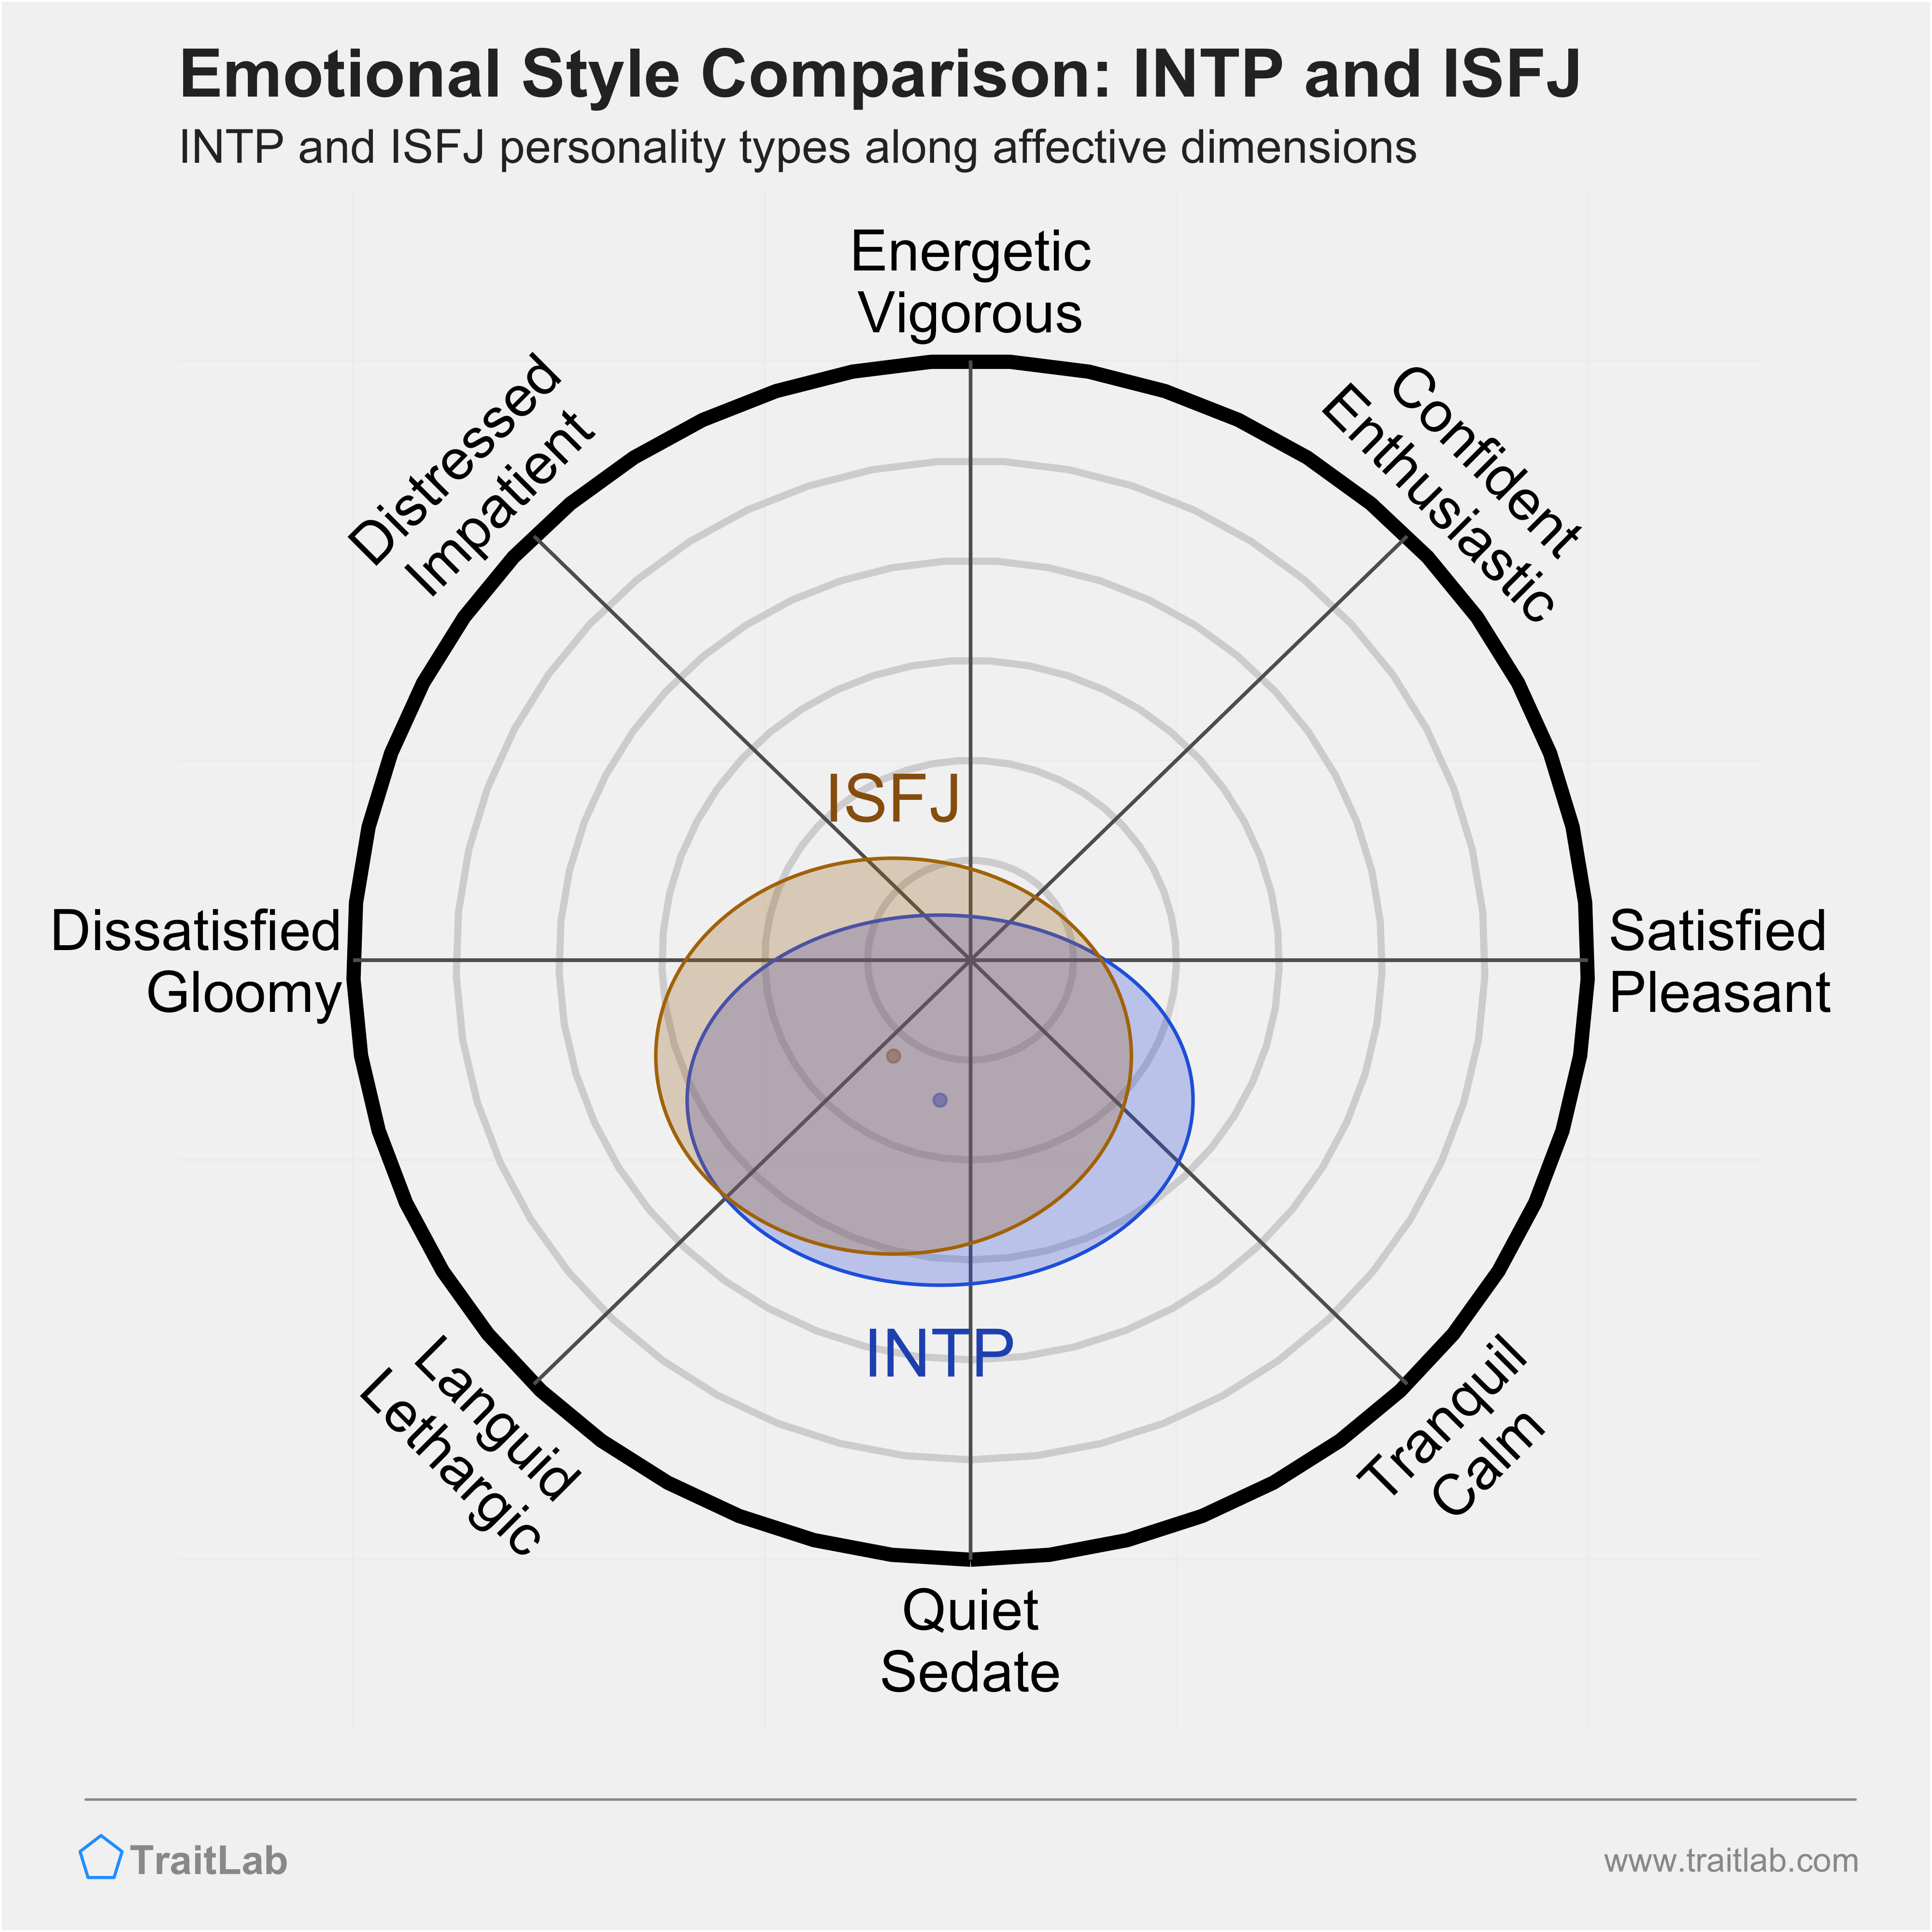 INTP and ISFJ comparison across emotional (affective) dimensions